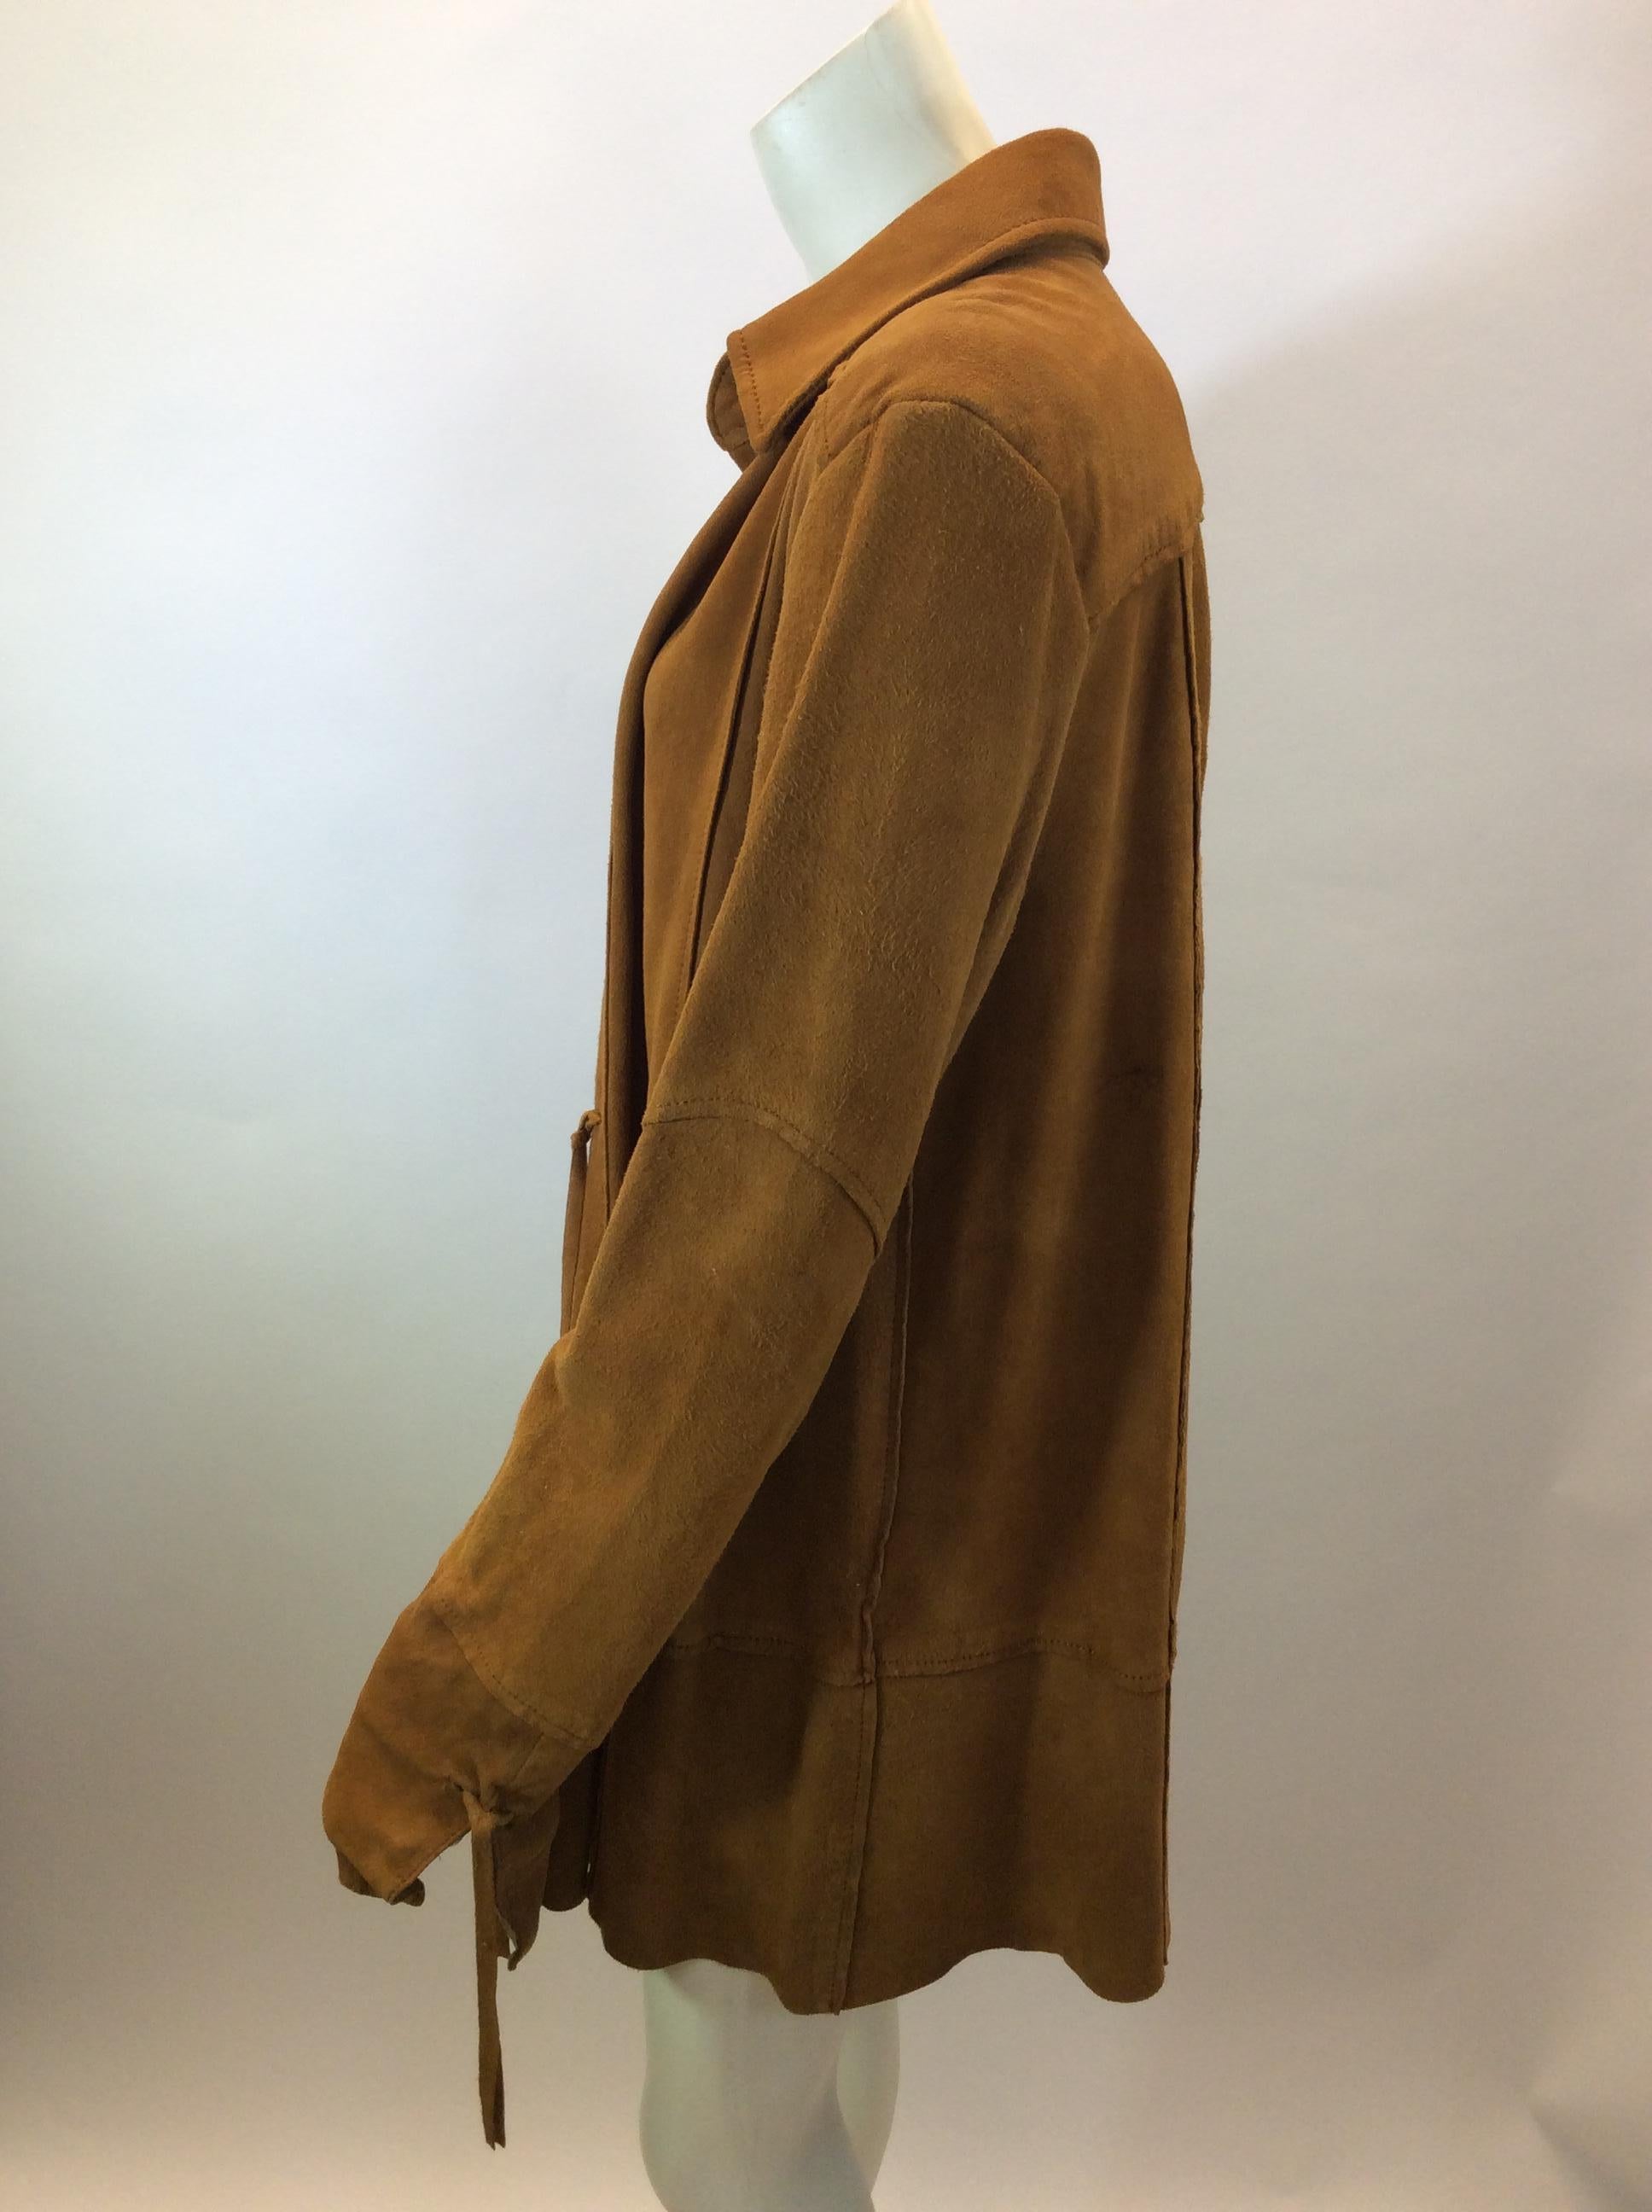 Elizabeth & James Rust Suede Jacket
$299
Made in China
100% Leather
Lining- 100% Cotton
Size Large
Length 30